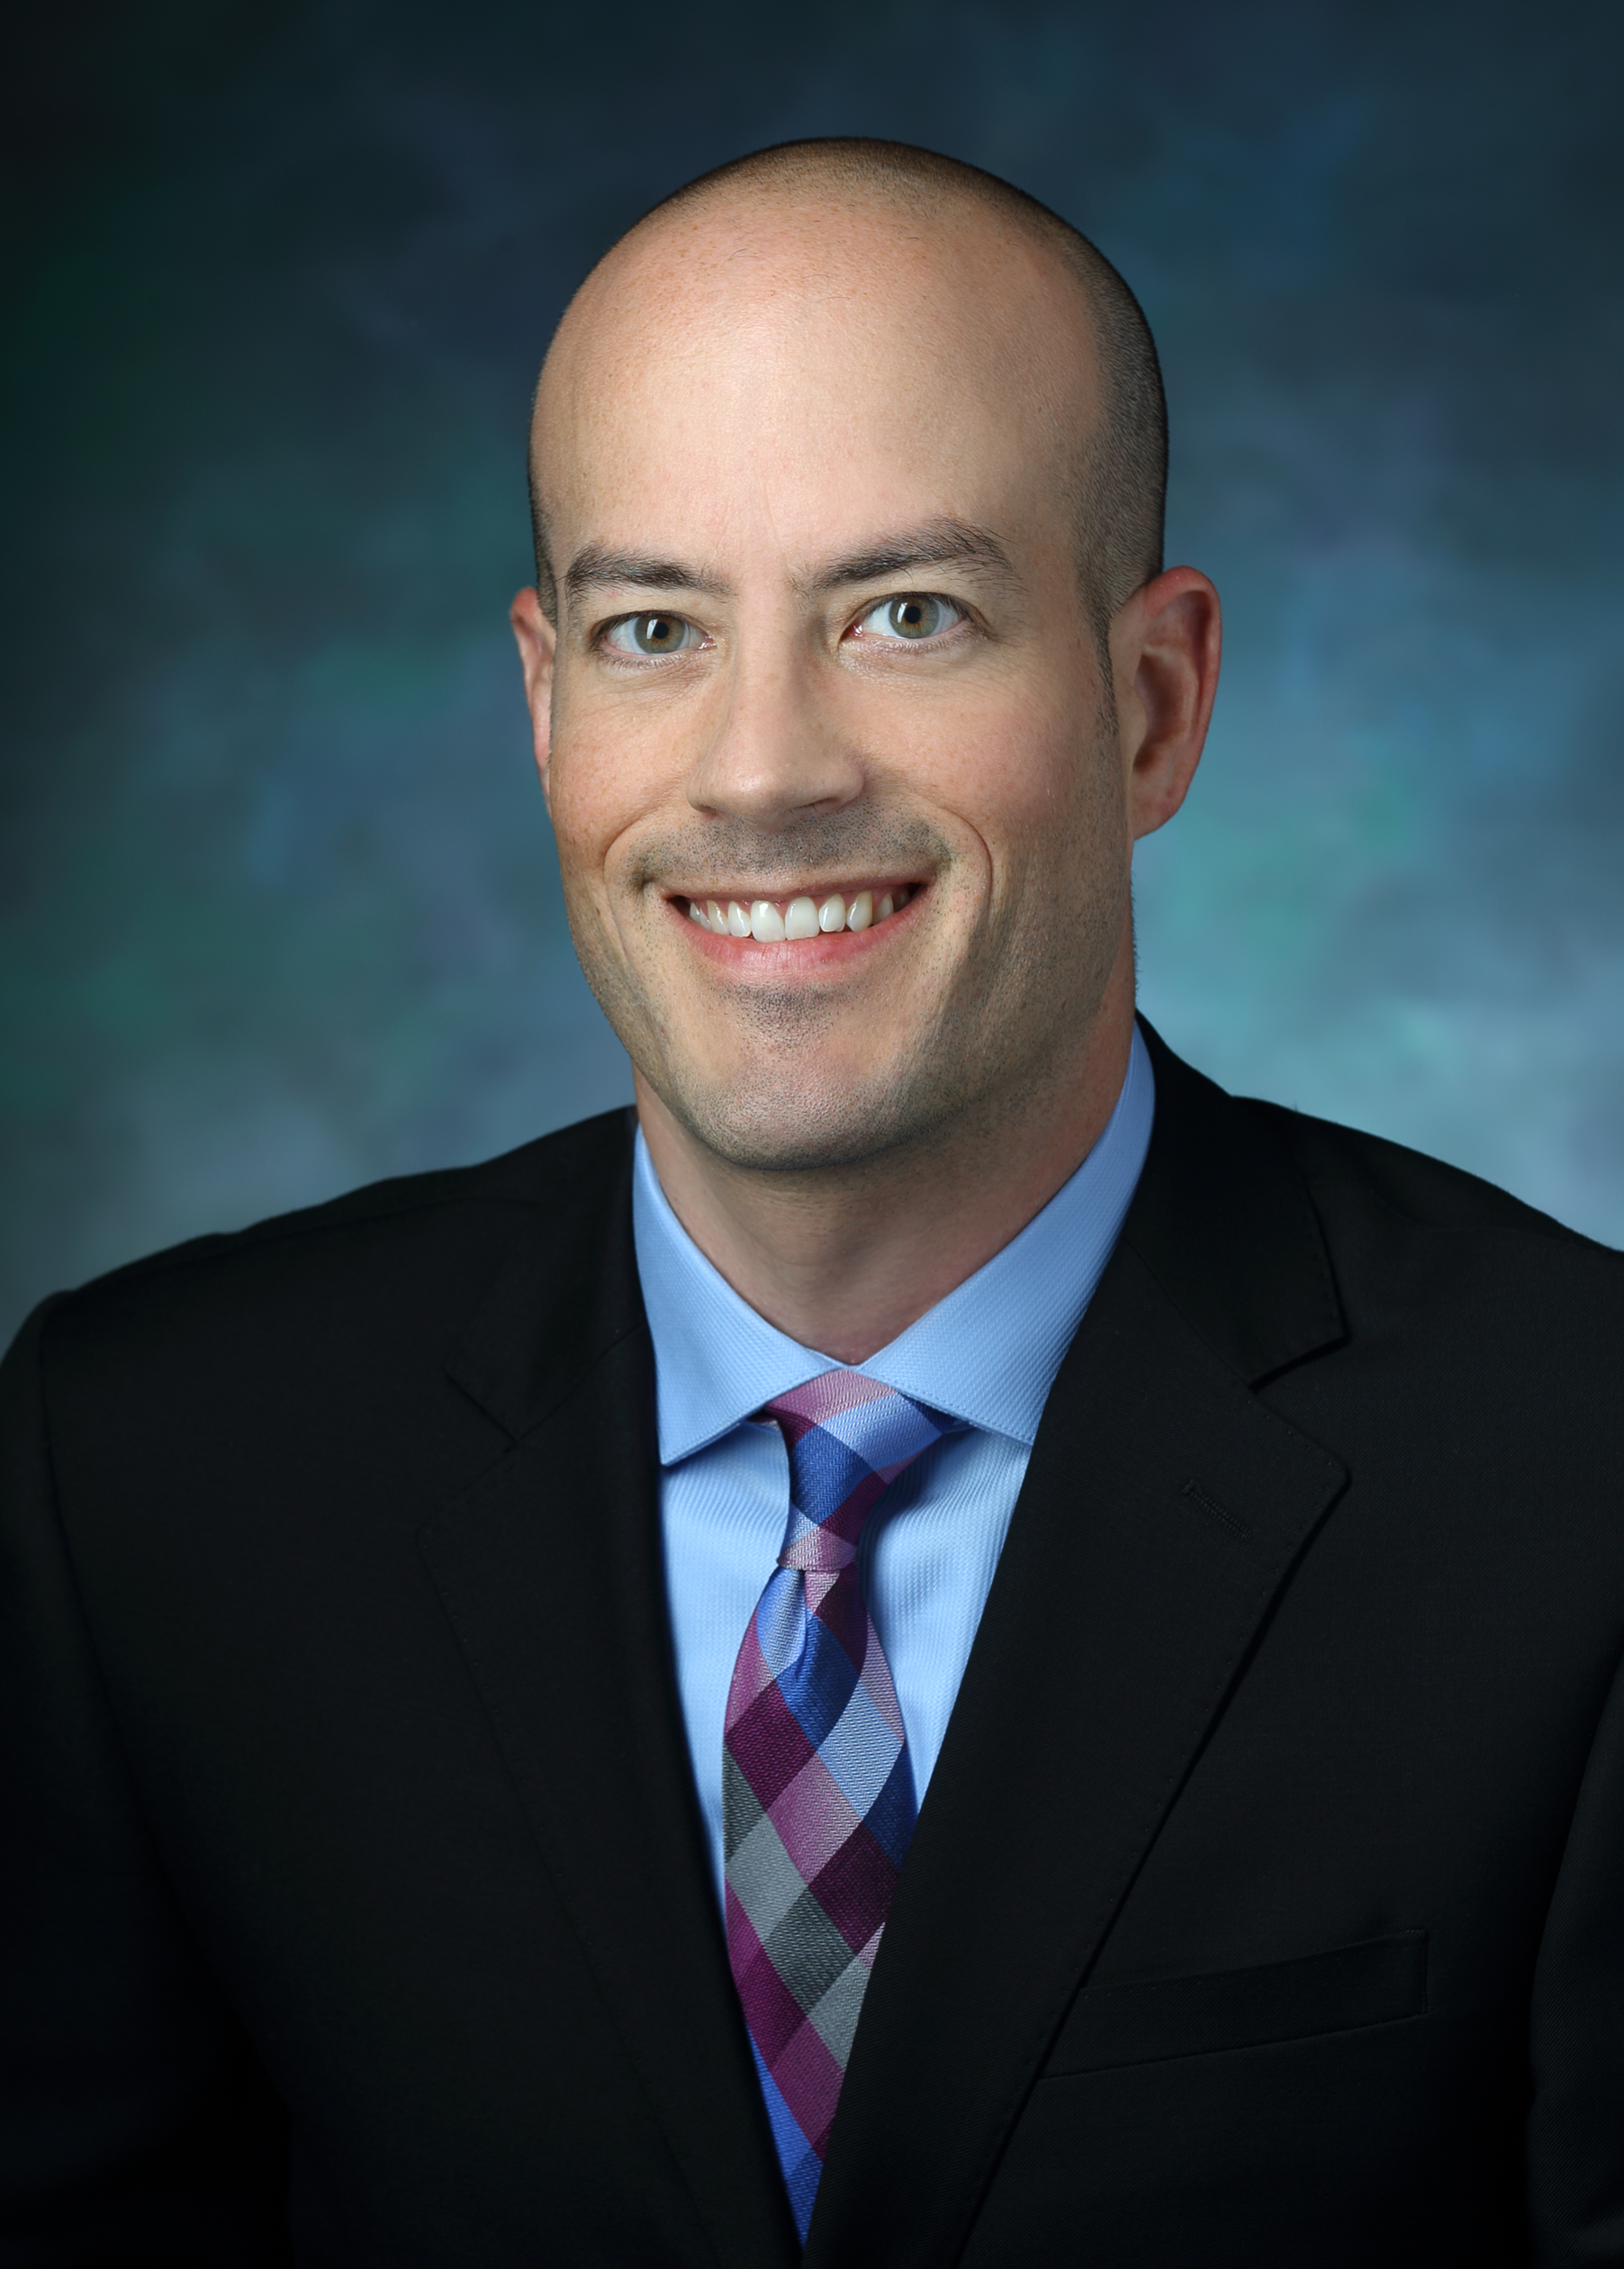 Portrait photo of Ben Larman. He is wearing a black suit with a light blue shirt and a pink, light blue and royal blue plaid tie. He is seated against a blue multicolor background.